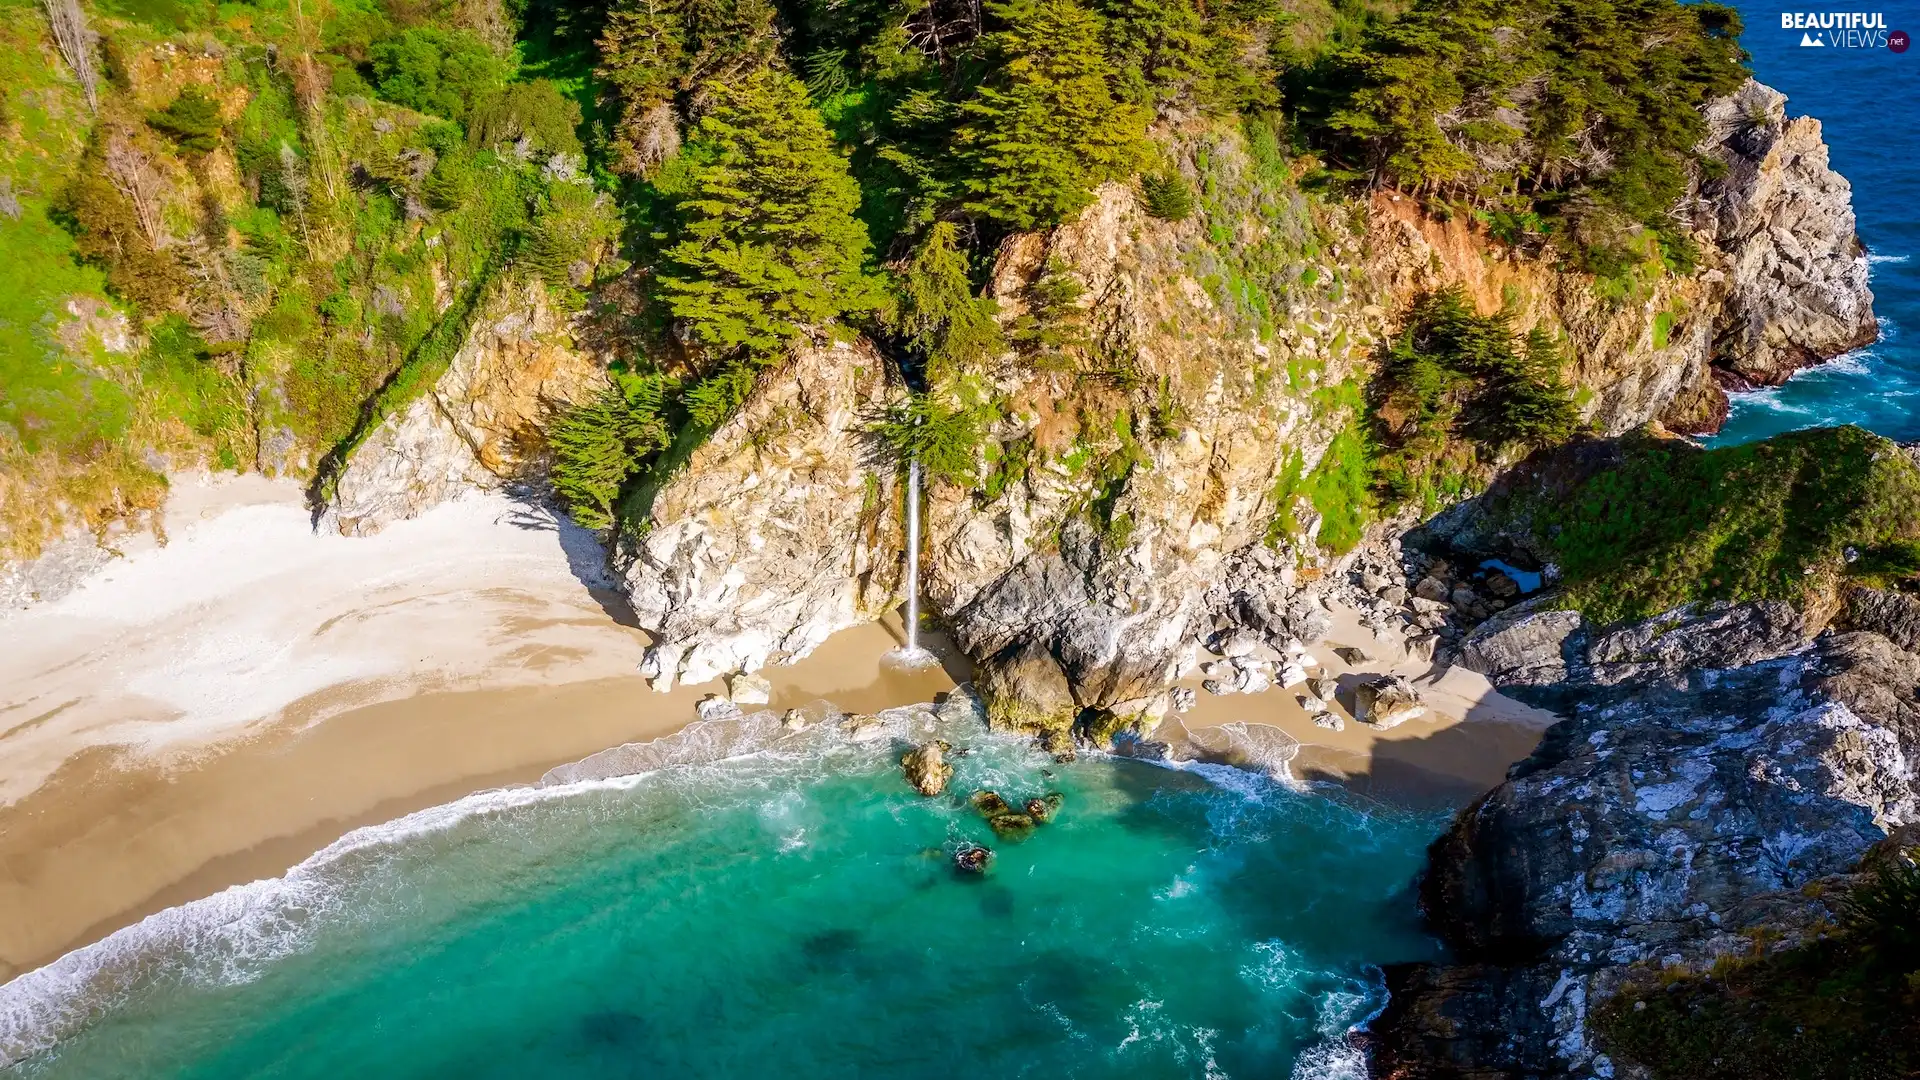 Gulf, McWay Falls, VEGETATION, Monterey County, Beaches, trees, California, rocks, Julia Pfeiffer Burns State Park, The United States, sea, viewes, McWay Cove